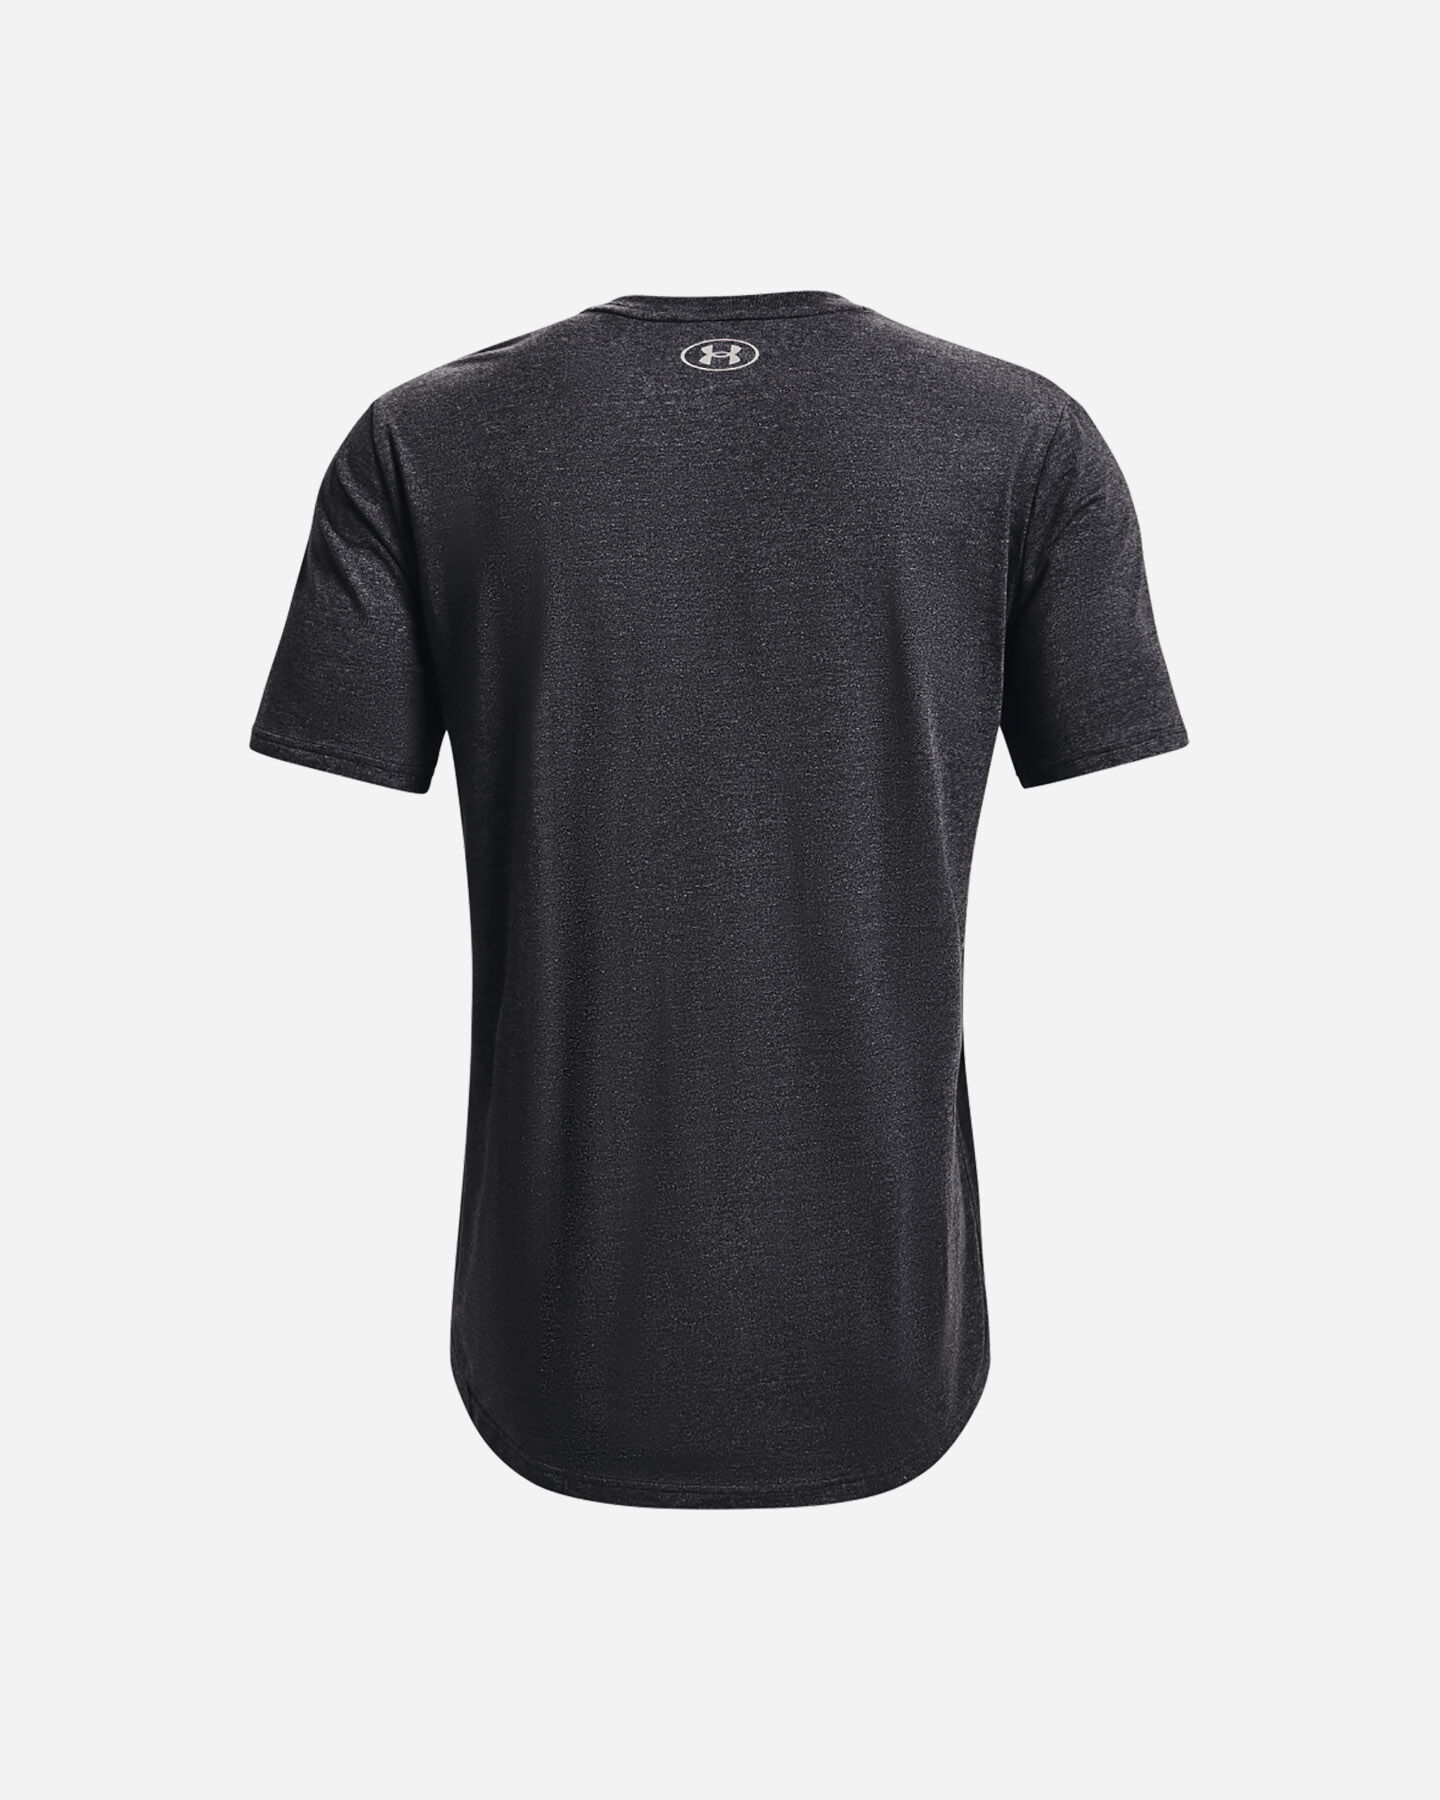  T-Shirt UNDER ARMOUR THE ROCK BSR RESPECT M S5336798|0001|XS scatto 1